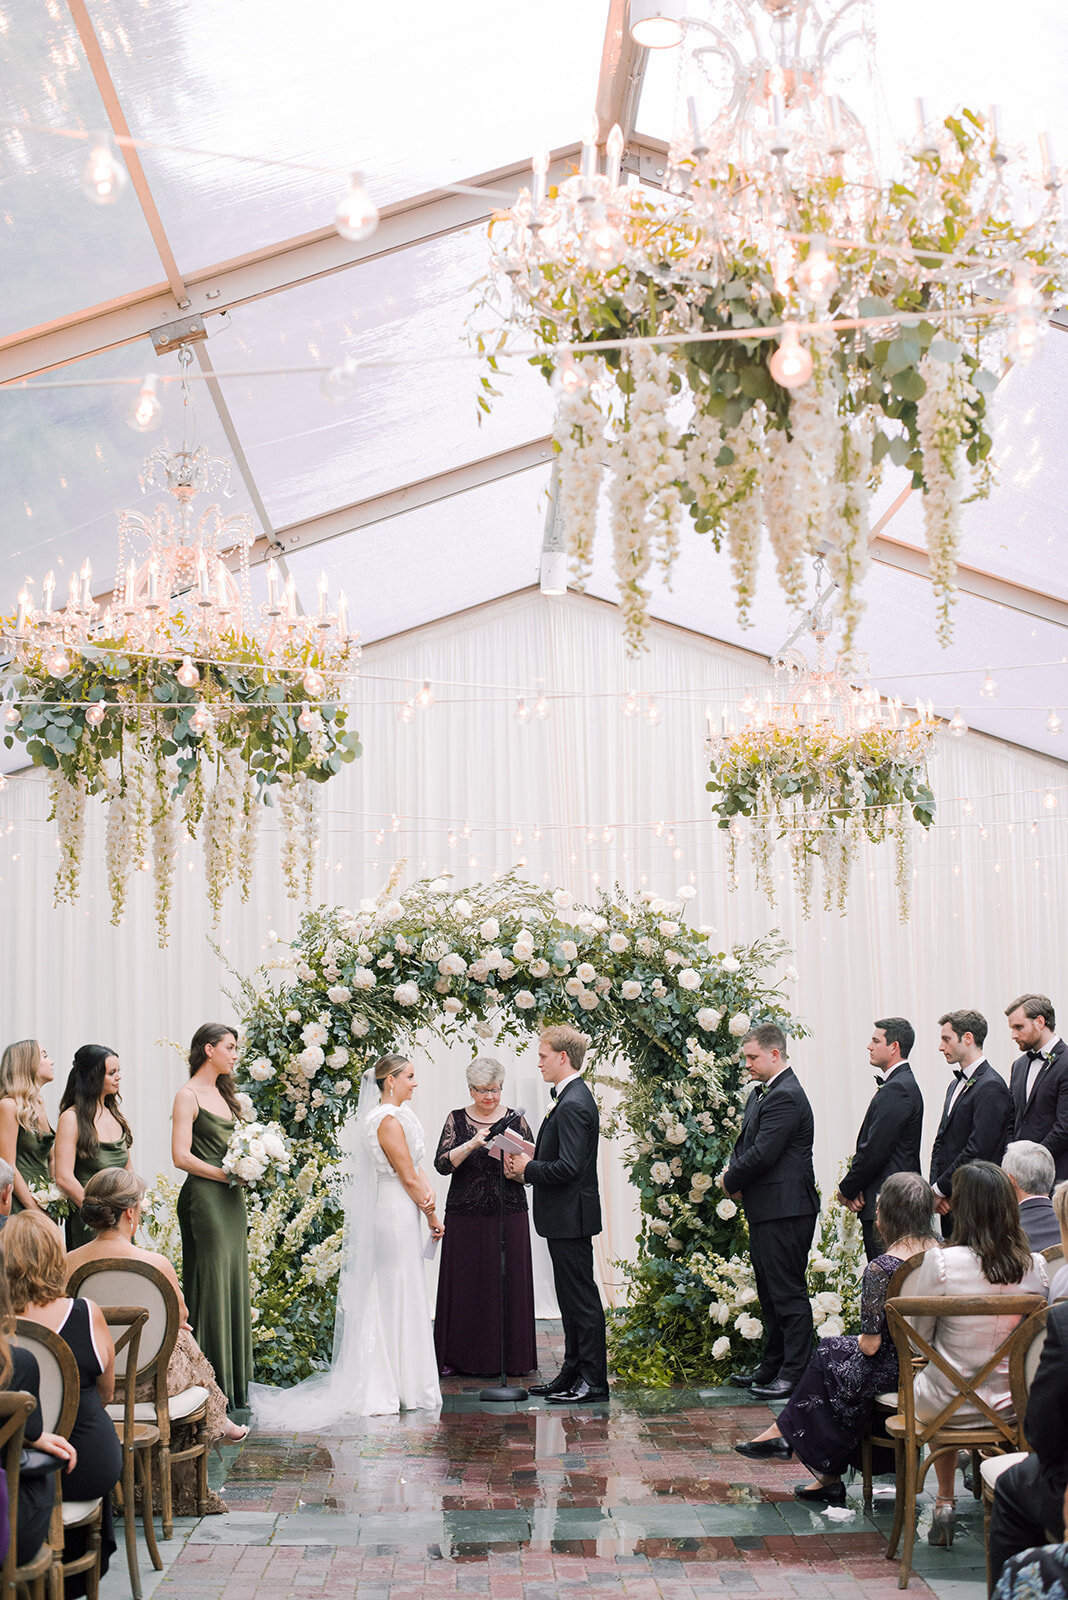 Chicago Illuminating Co. Tent Wedding with Lush Floral Arch_65